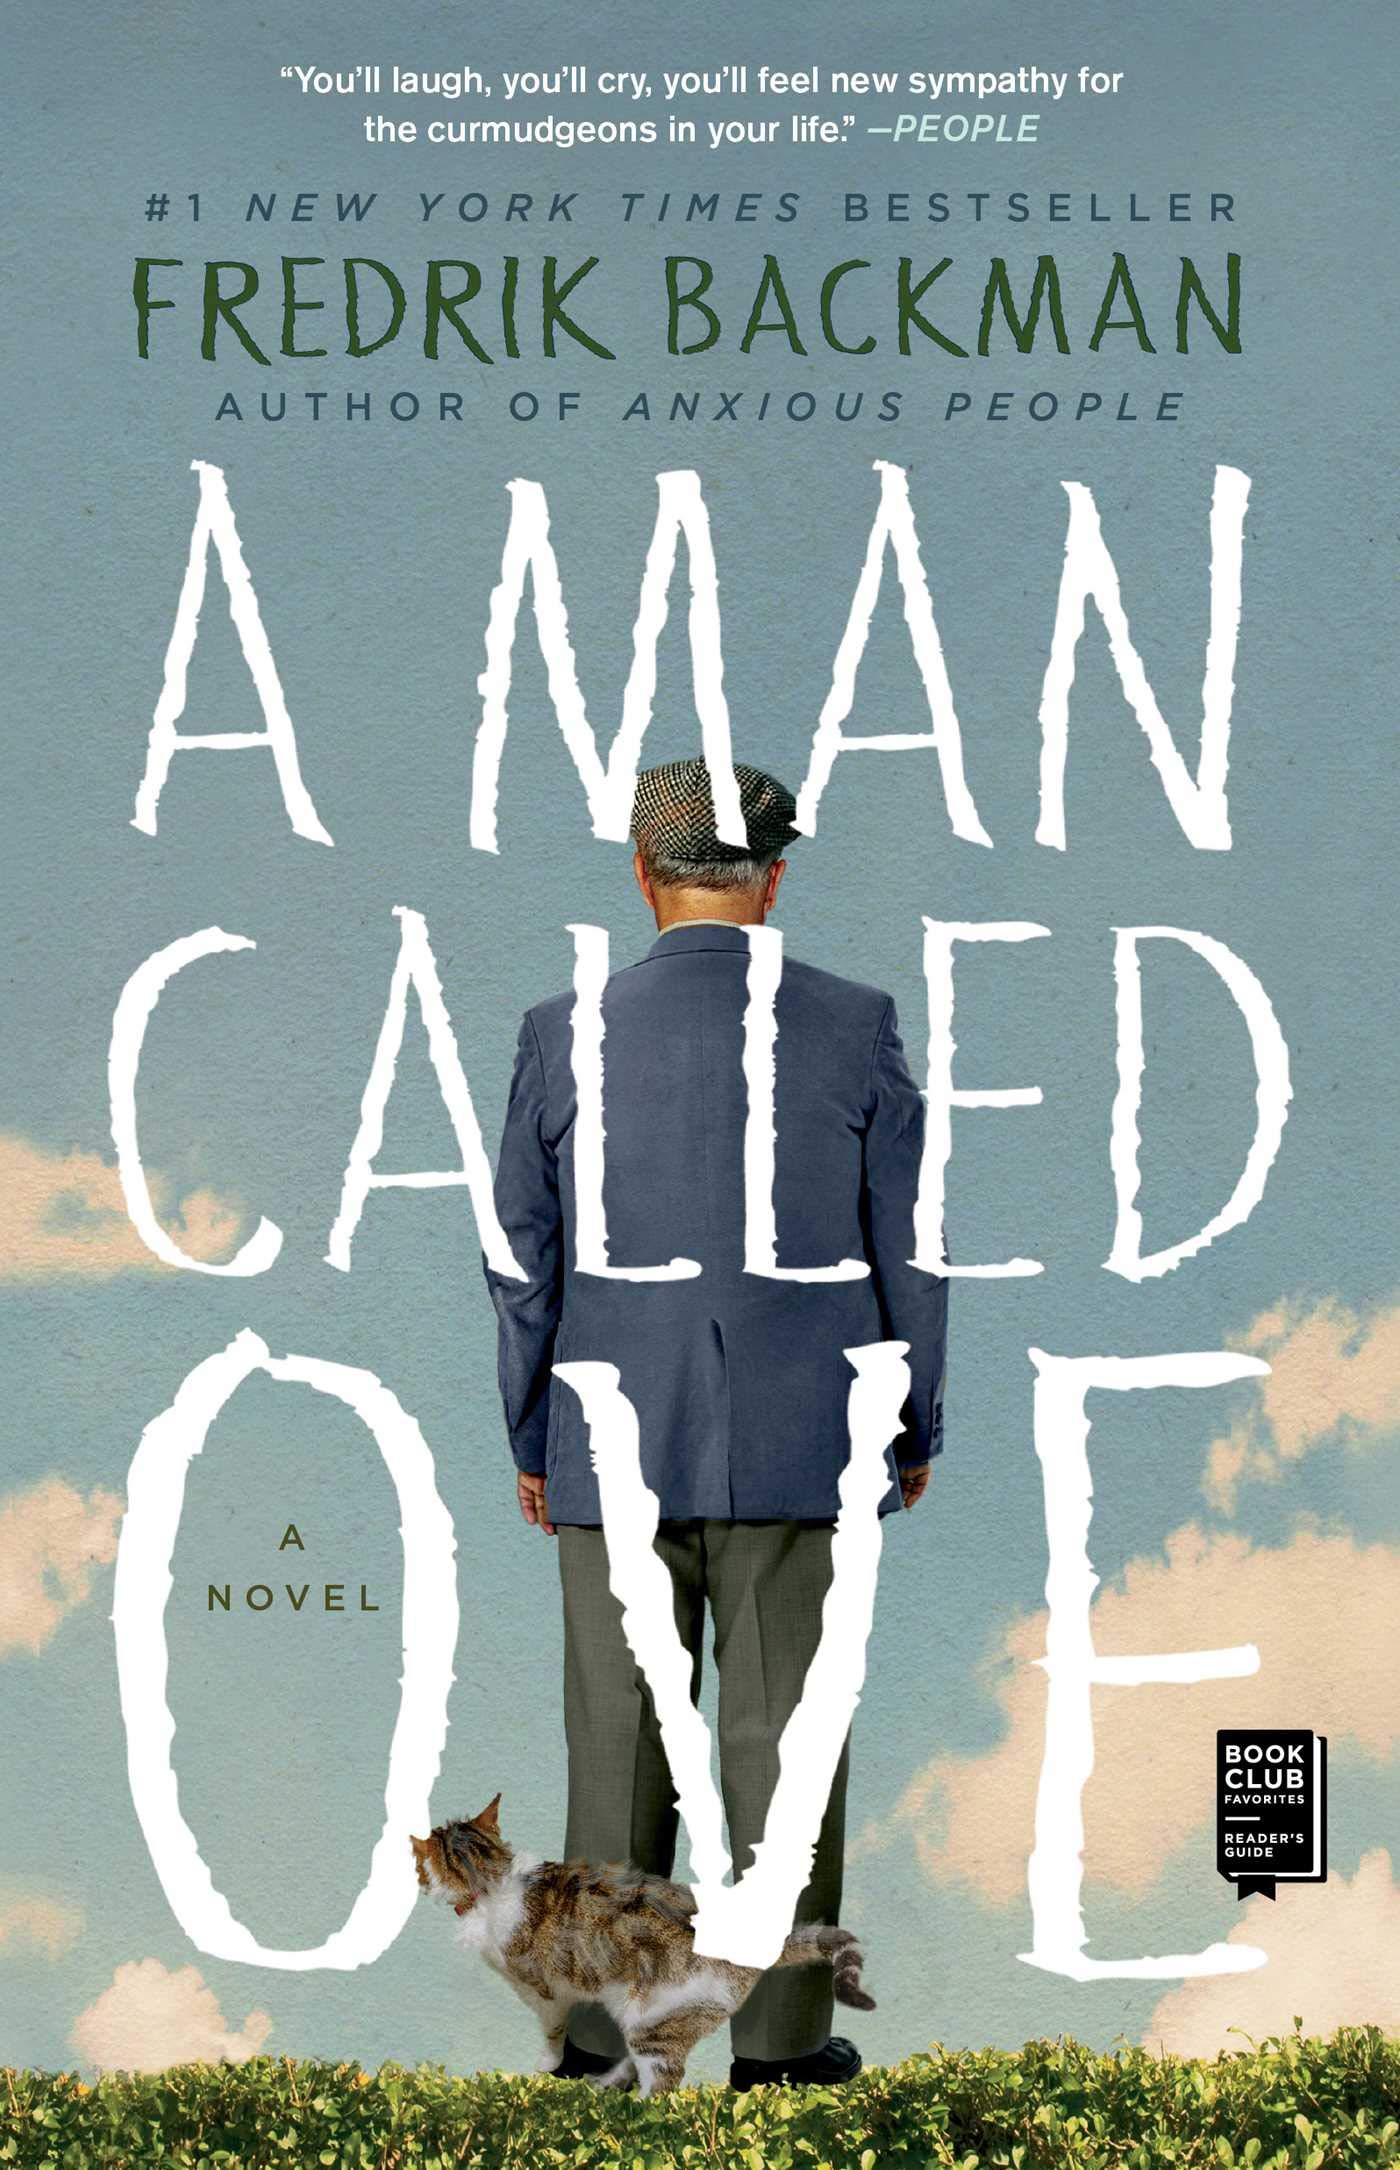 See A Man Called Ove in Library Catalog